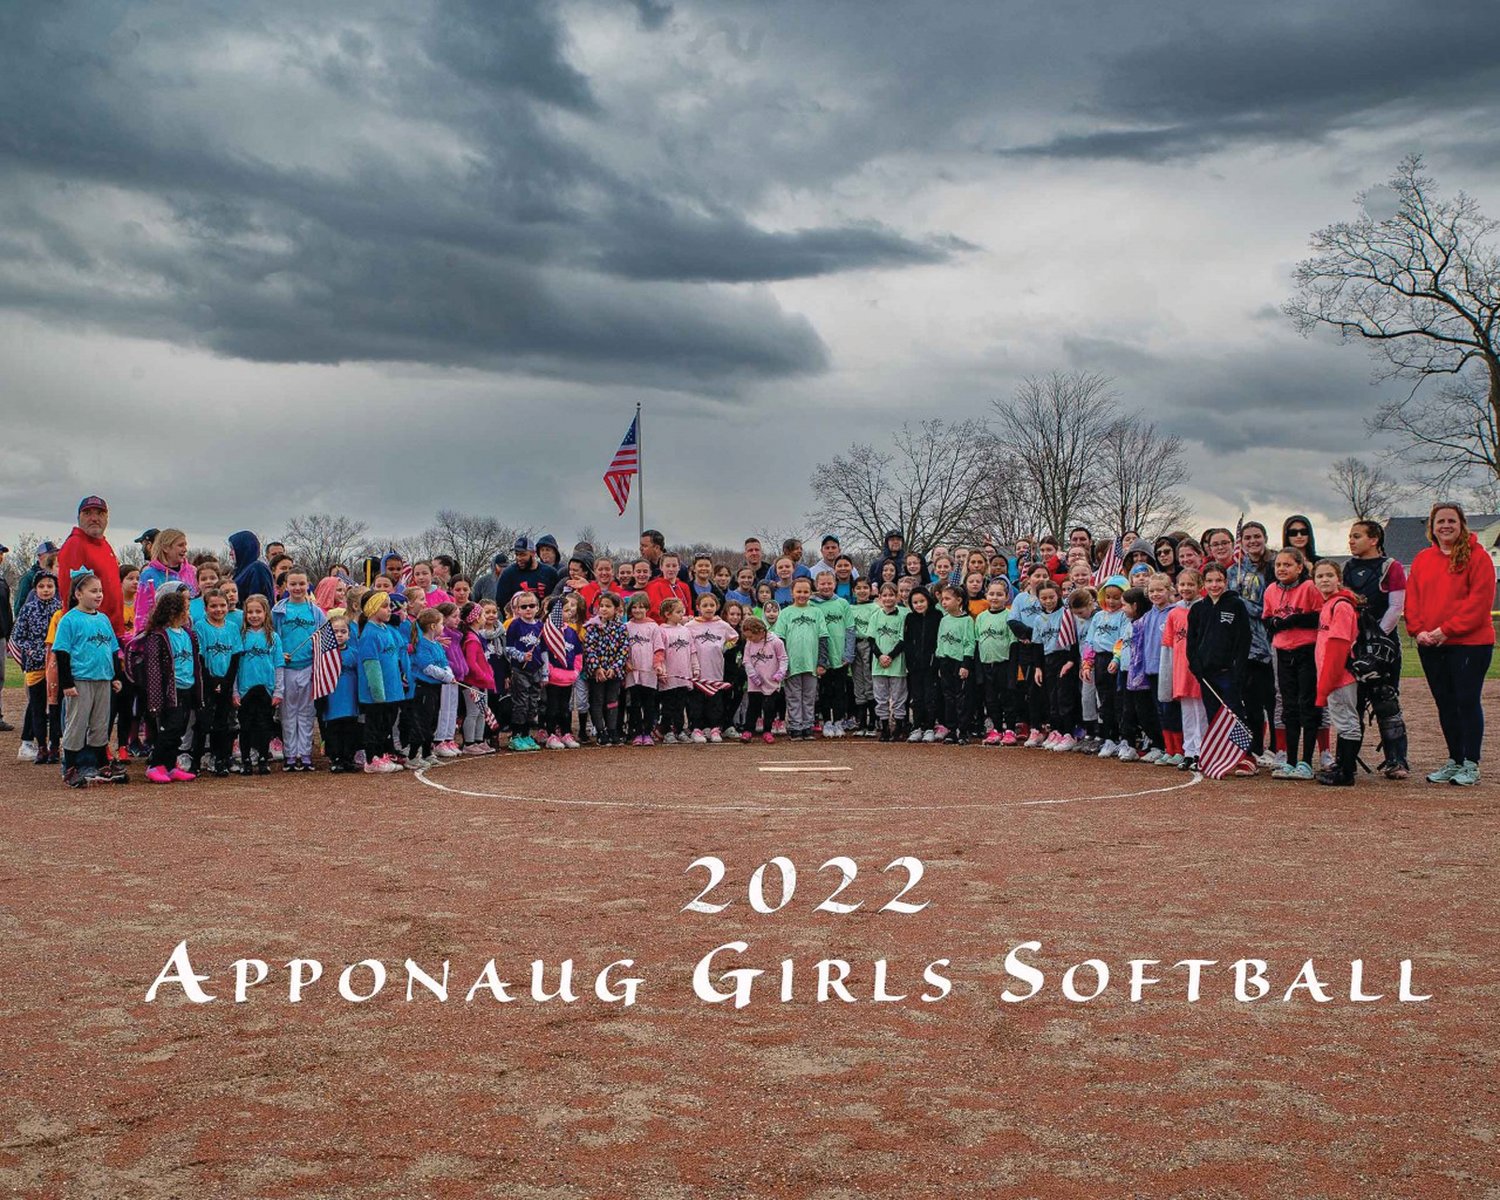 OPENING DAY FUN: Players and coaches of Apponaug softball gather for a photo on Opening Day.